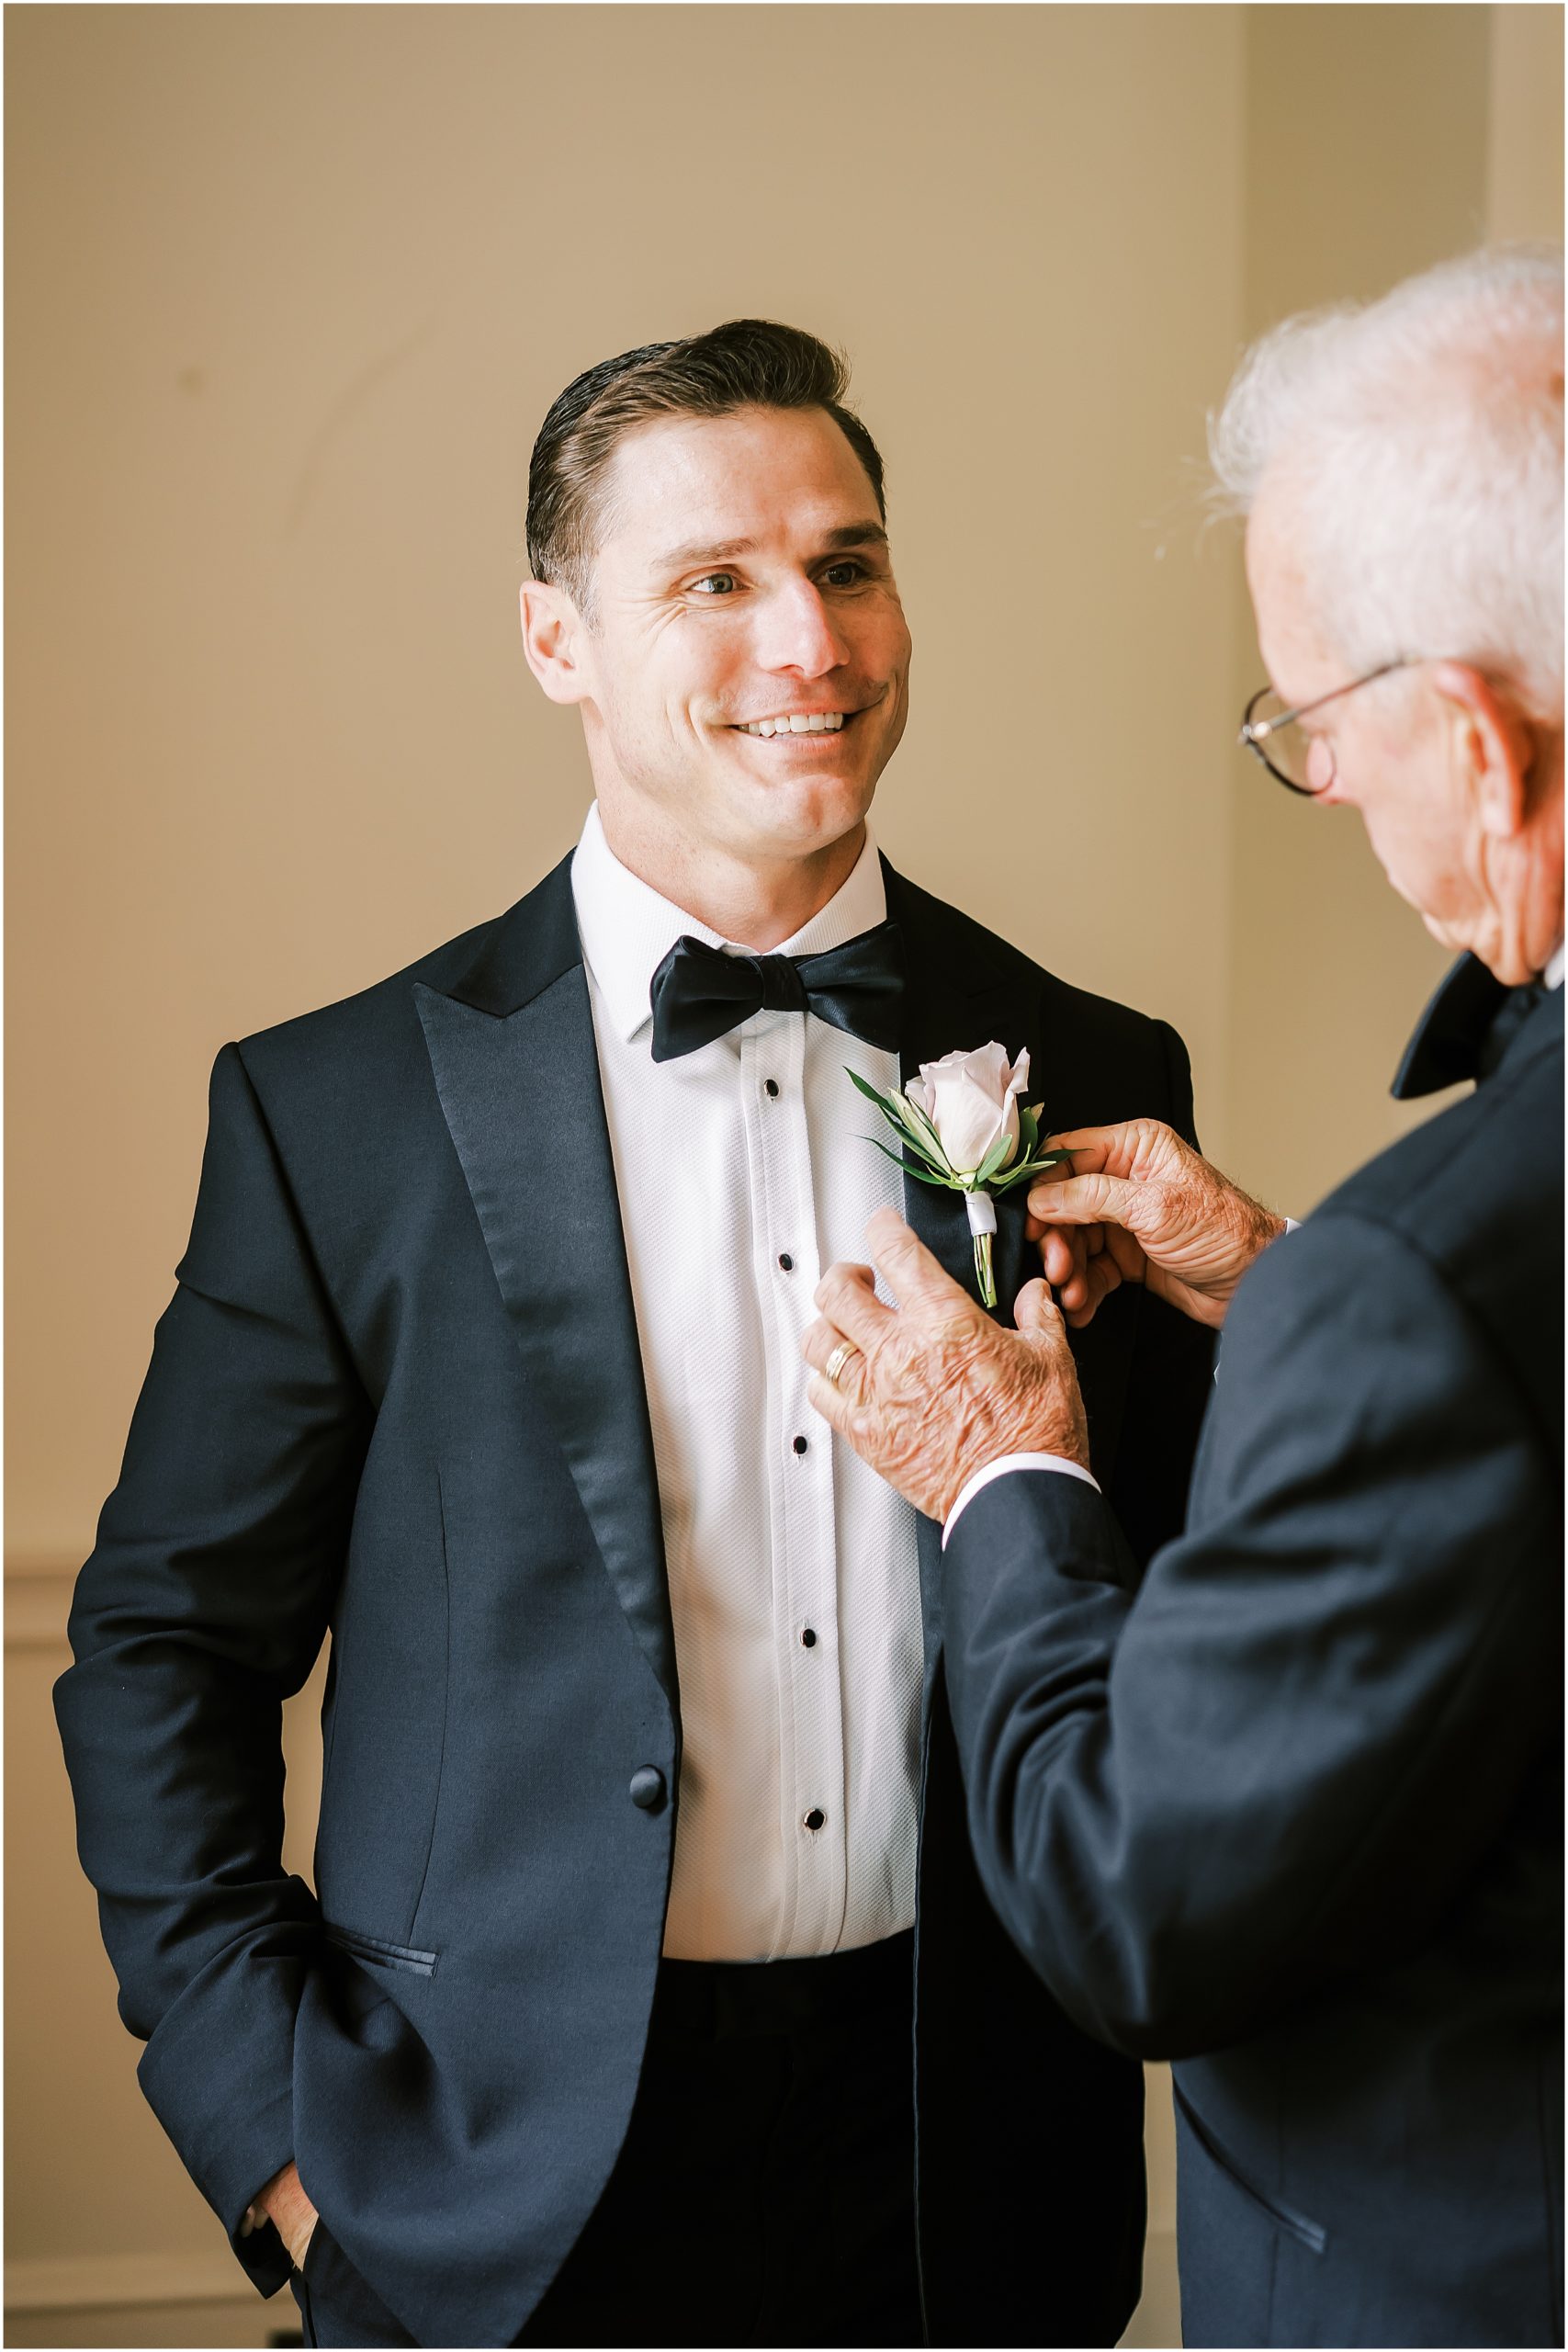 Helping groom pin the boutonniere for wedding at Rust Manor House